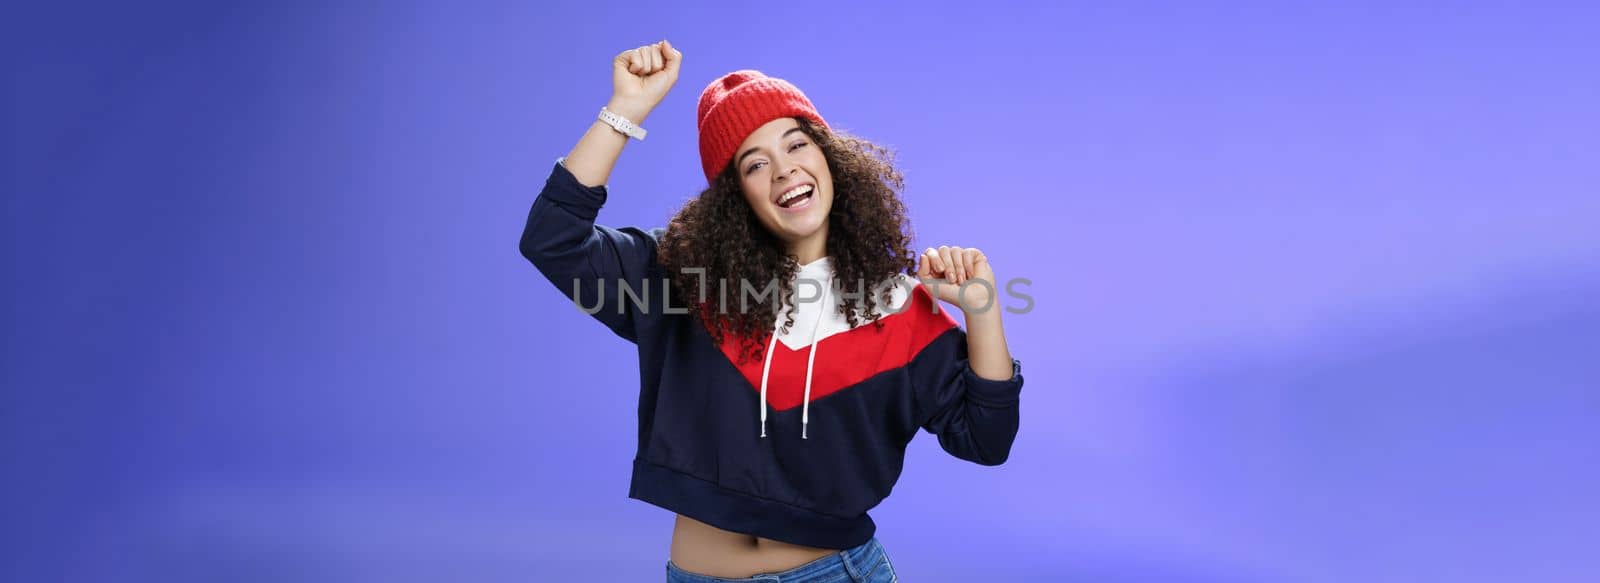 Hey come on dance with me. Friendly-looking bright and stylish cheerful woman with curly hairstyle wearing warm beanie raising hands up as enjoying great day, having fun outdoors over blue wall.